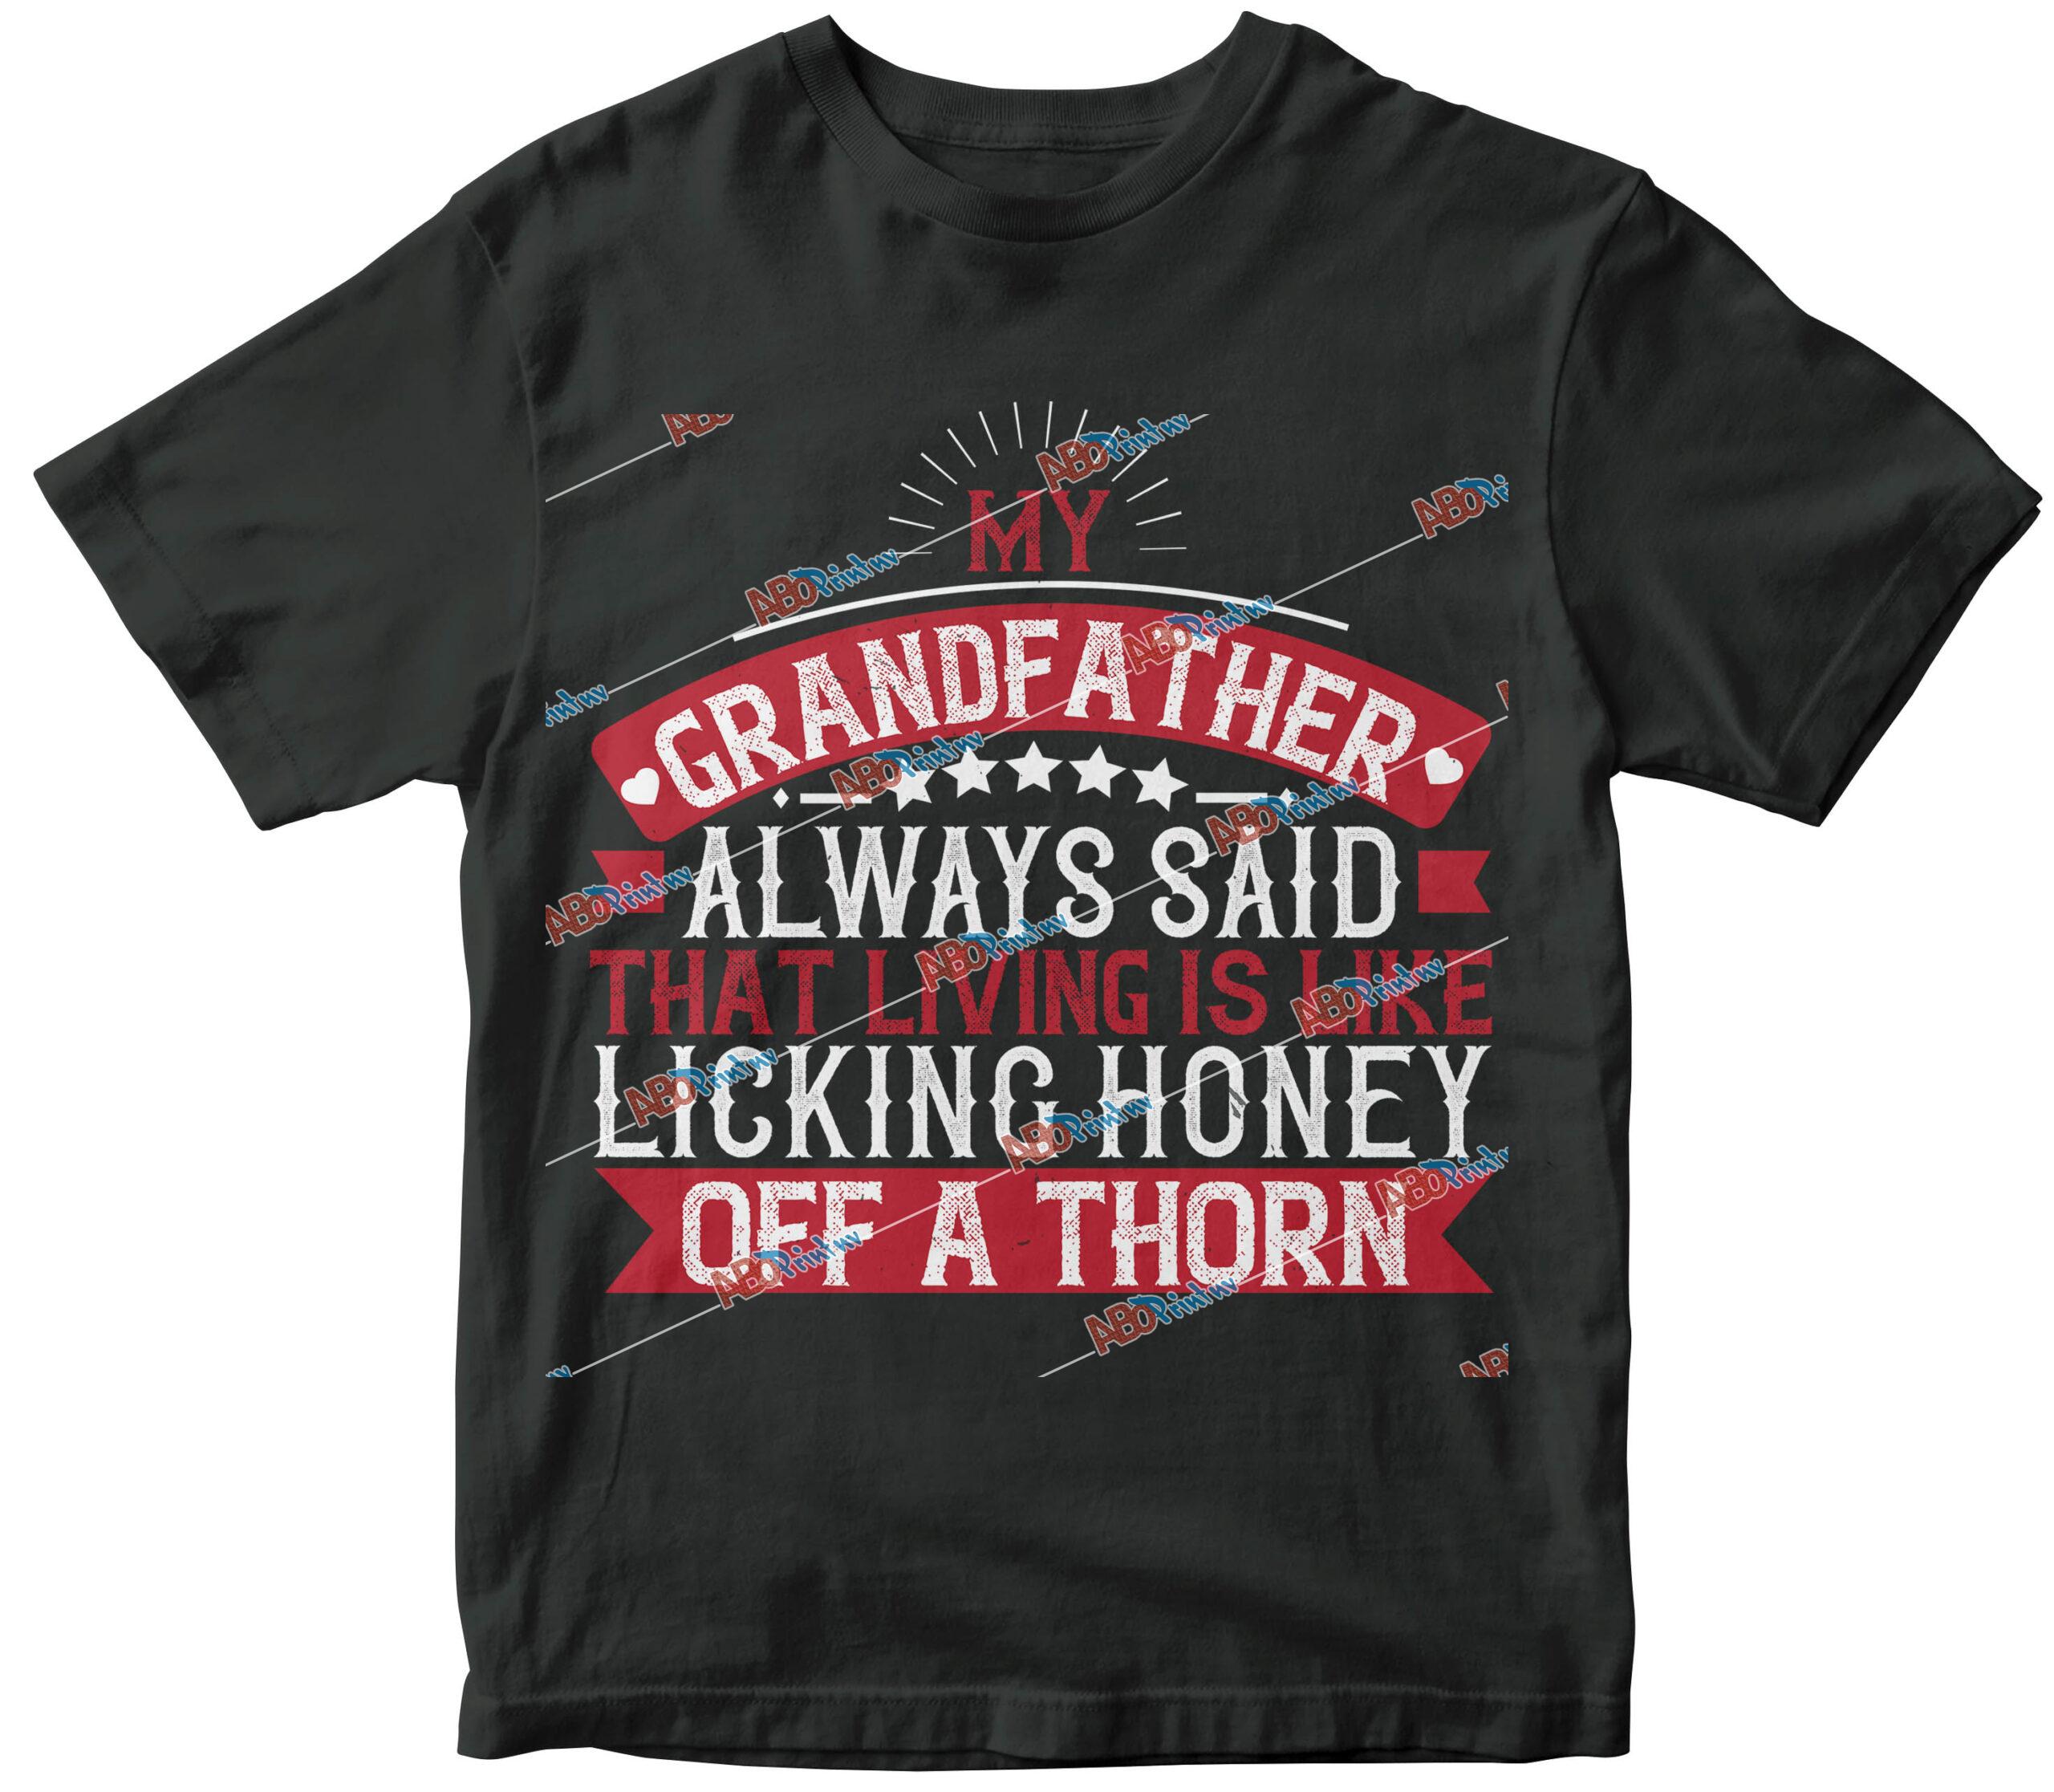 My grandfather always said that living is like licking honey off a thorn-02.jpg